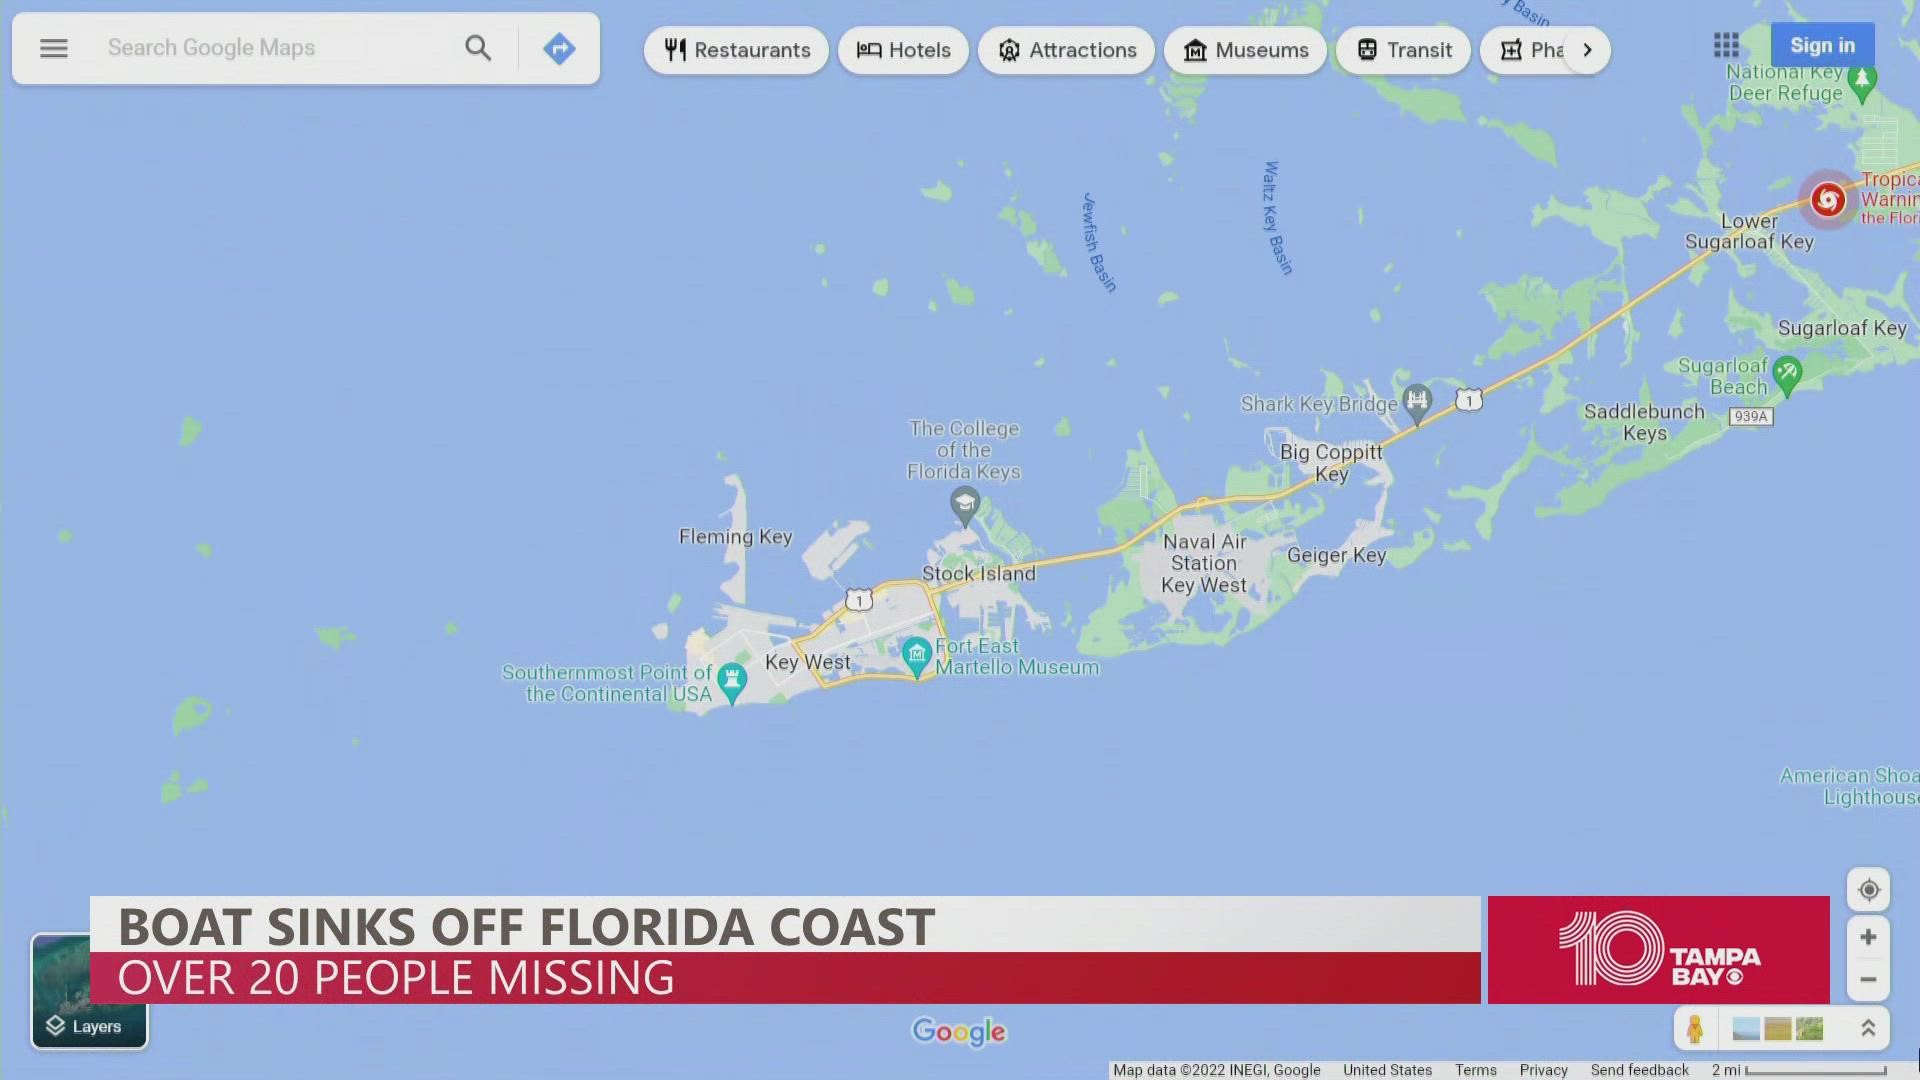 U.S. Border Patrol is searching for a missing vessel that sank off the coast of Florida.